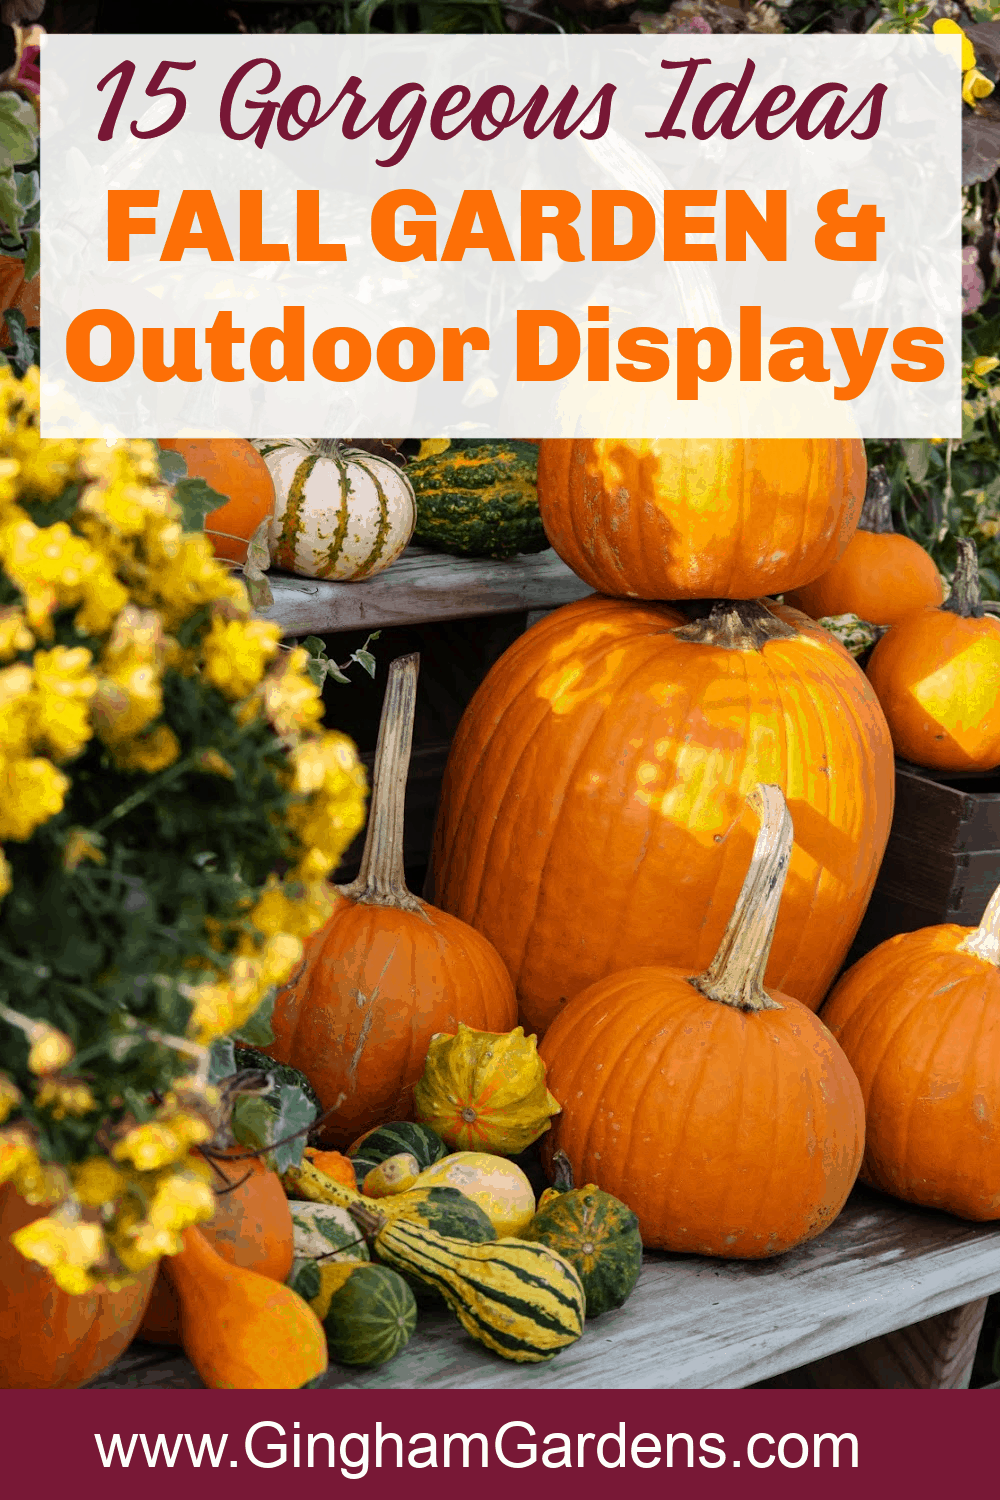 Image of pumpkins and fall flowers with text overlay - 15 Gorgeous Ideas Fall Garden and Outdoor Displays